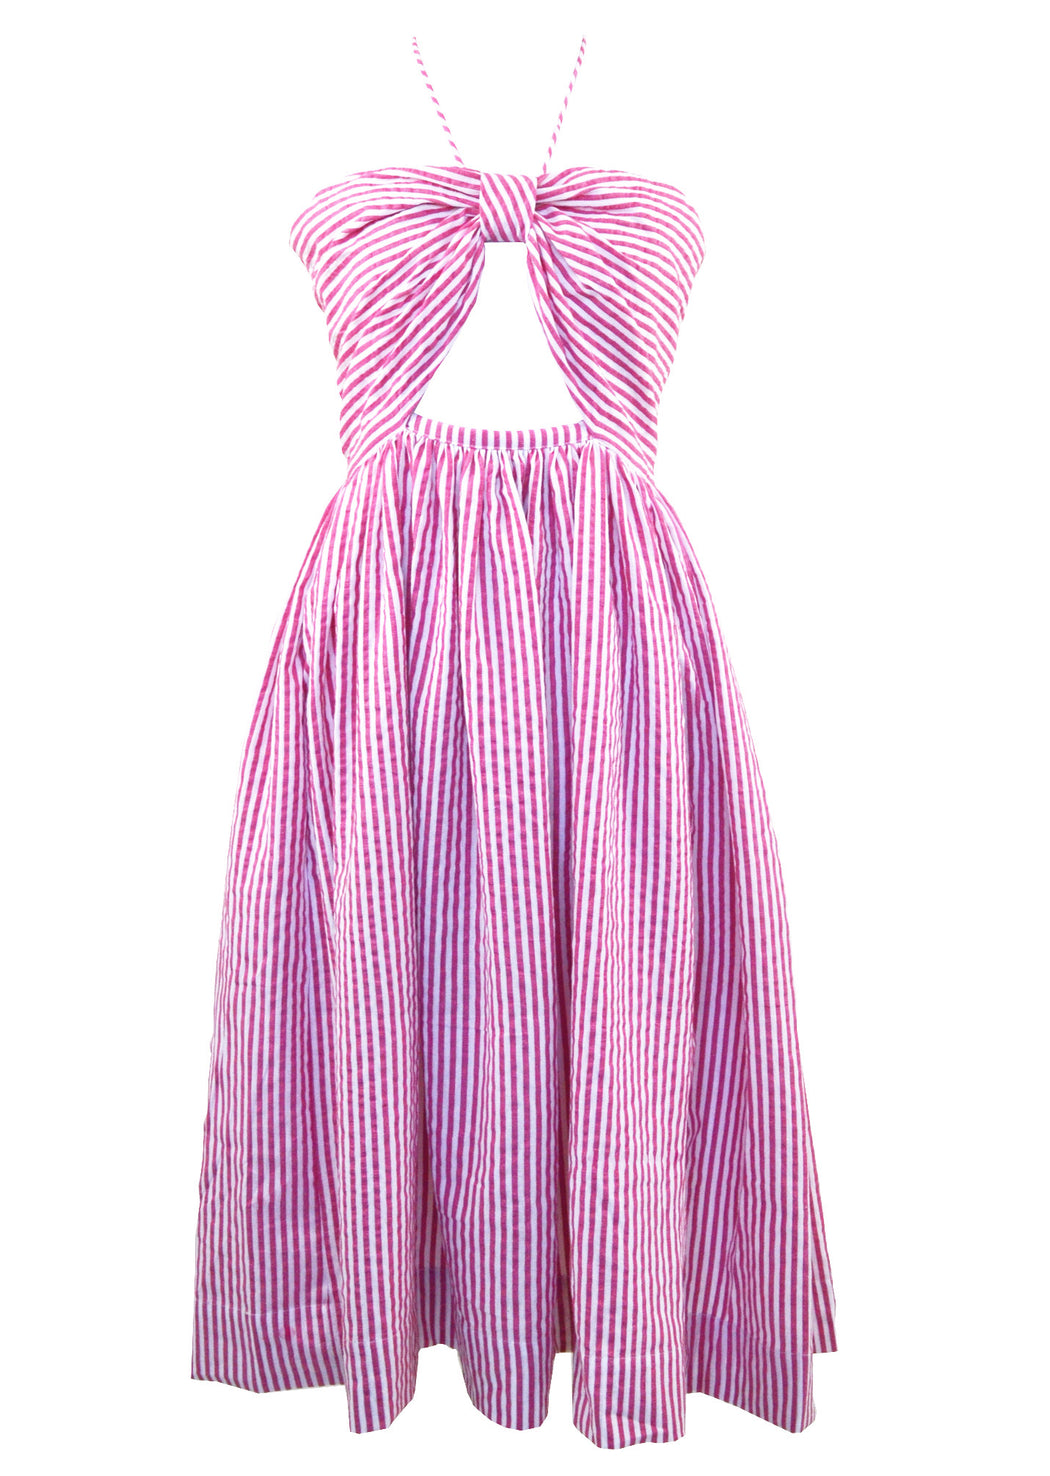 Goldie dress pink - Family Affairs